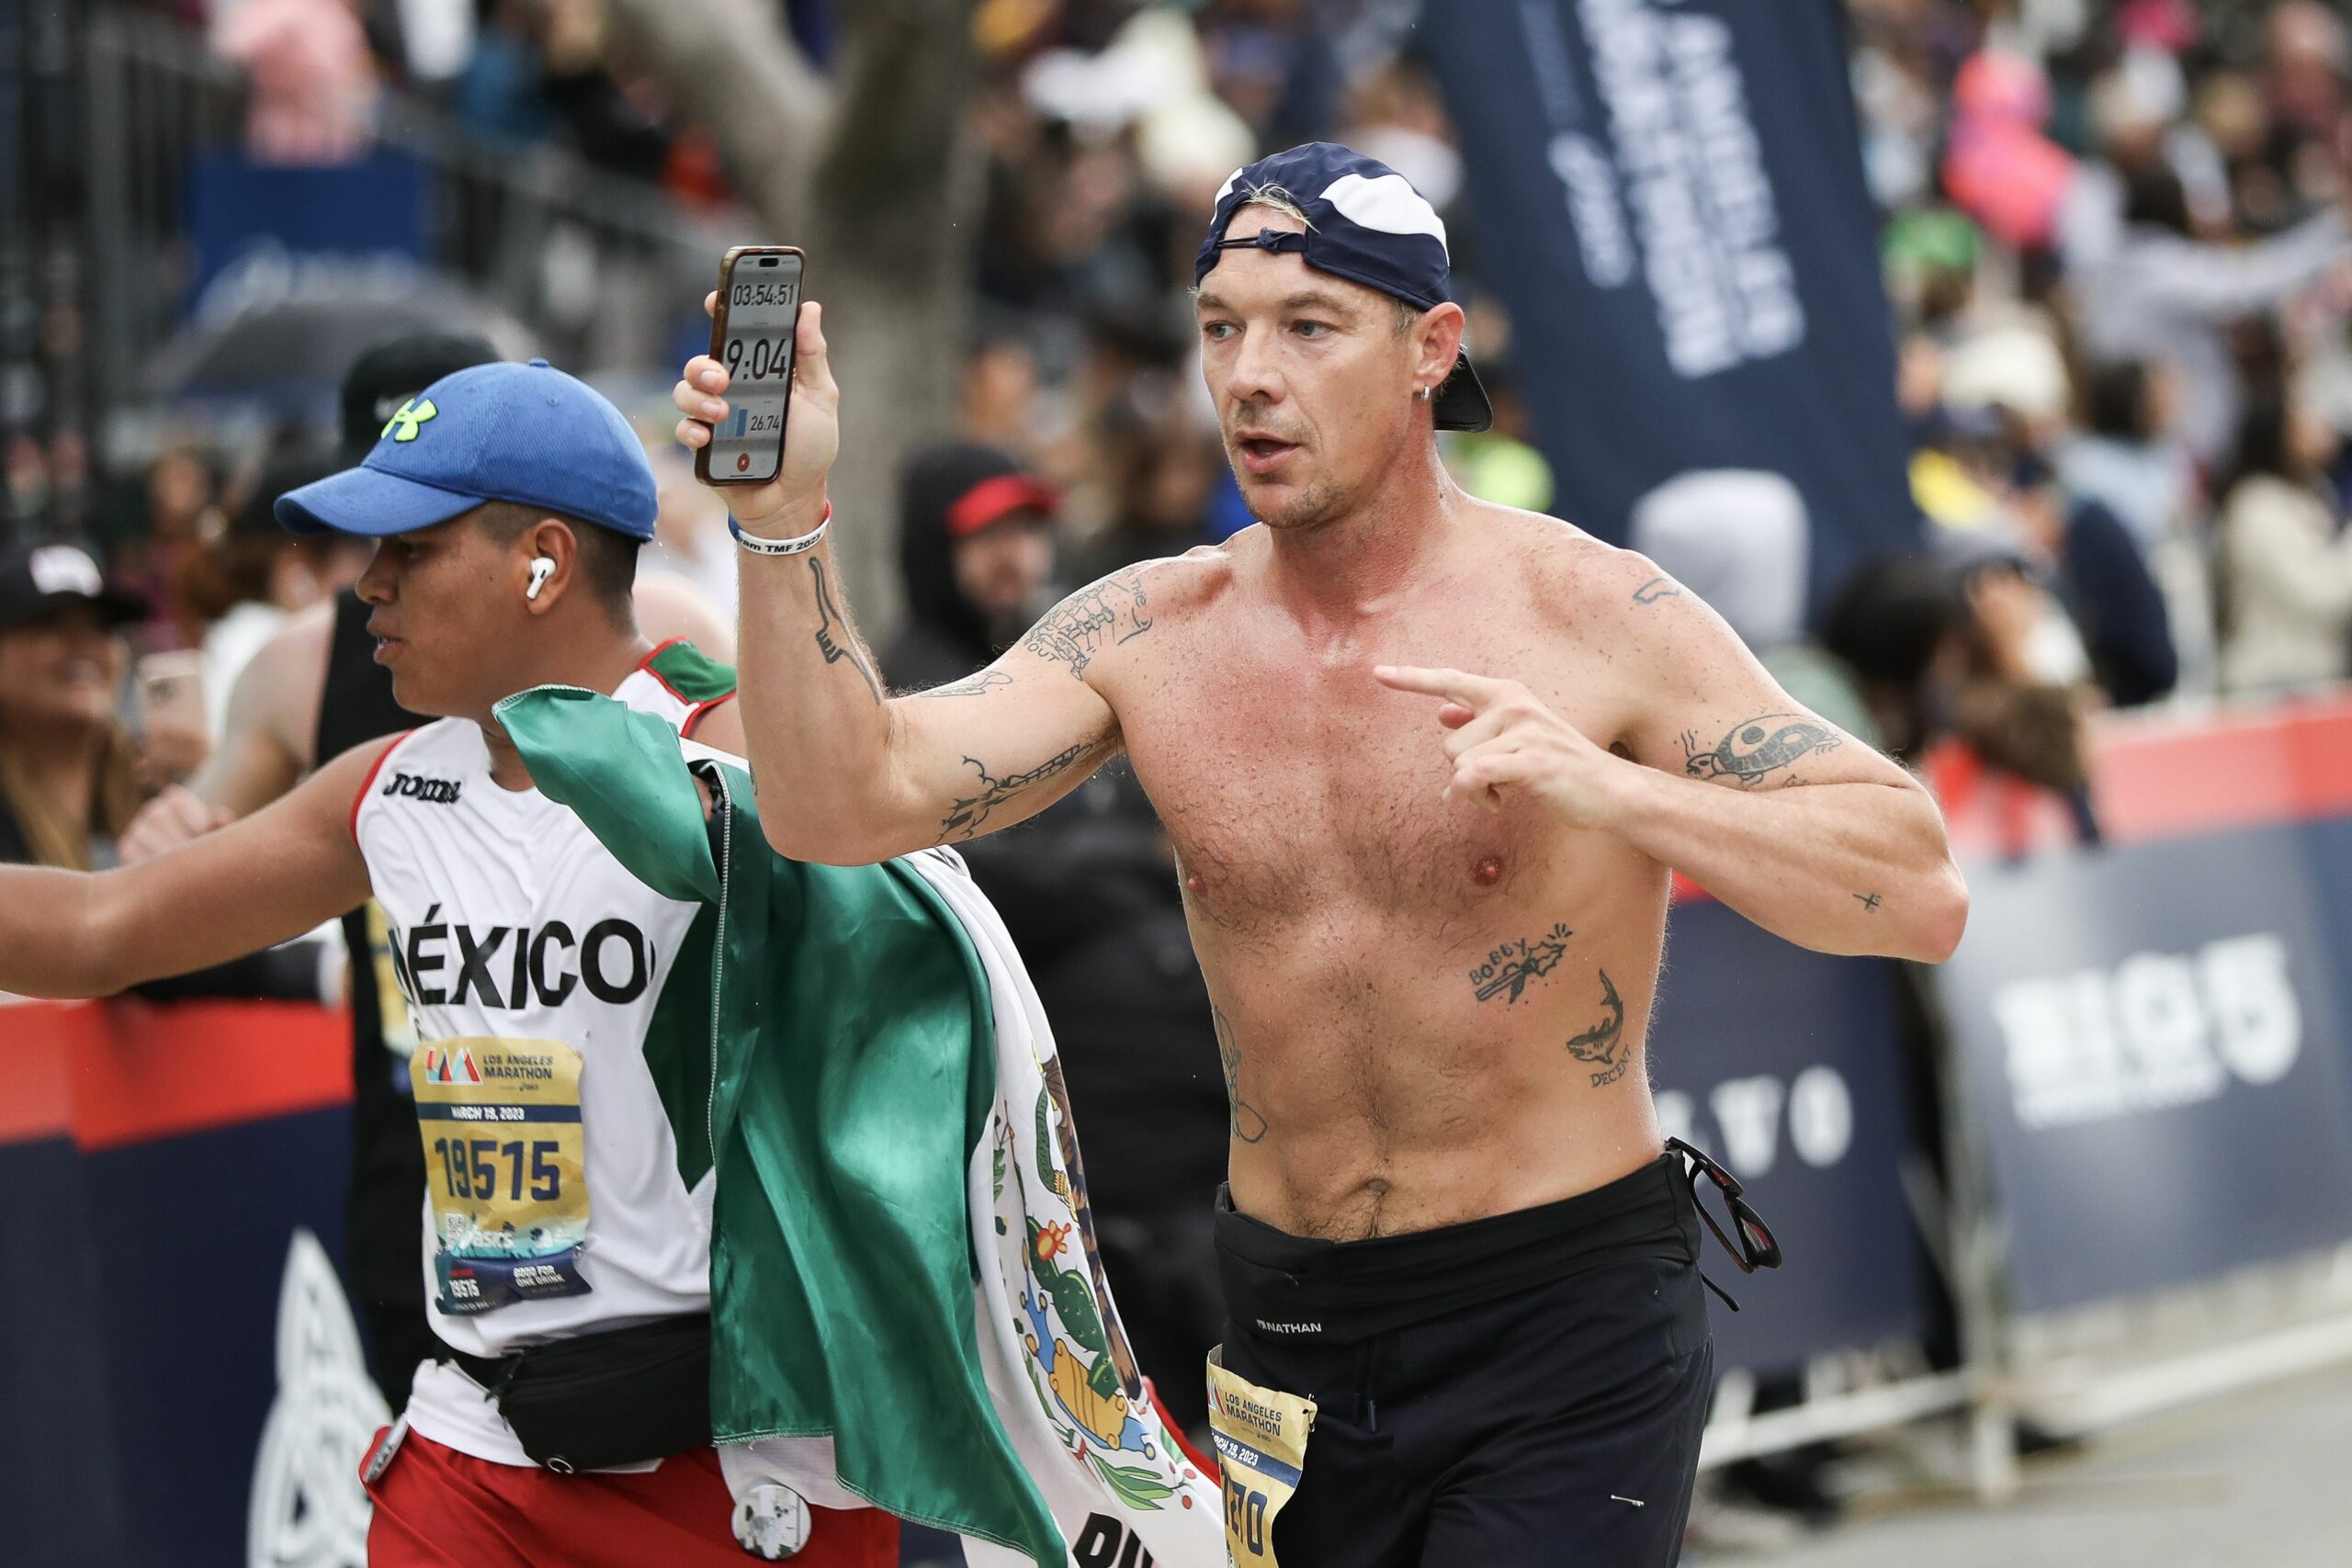 Diplo Ran the LA Marathon in Under Four Hours While High on Acid